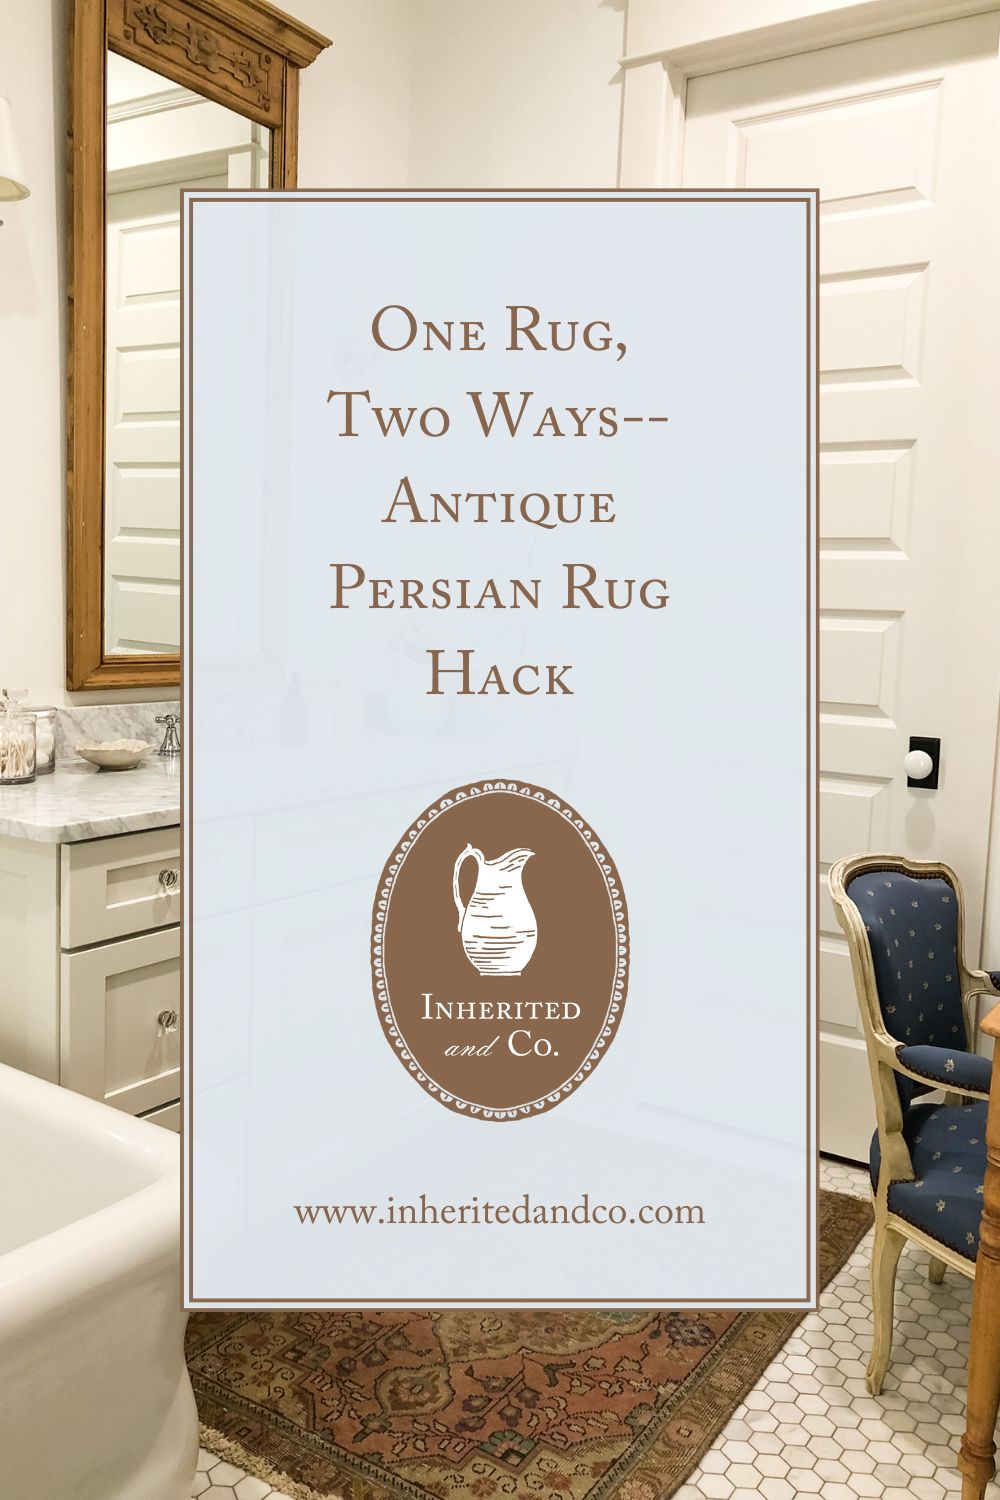 "One Rug, Two Ways--Antique Persian Rug Hack"